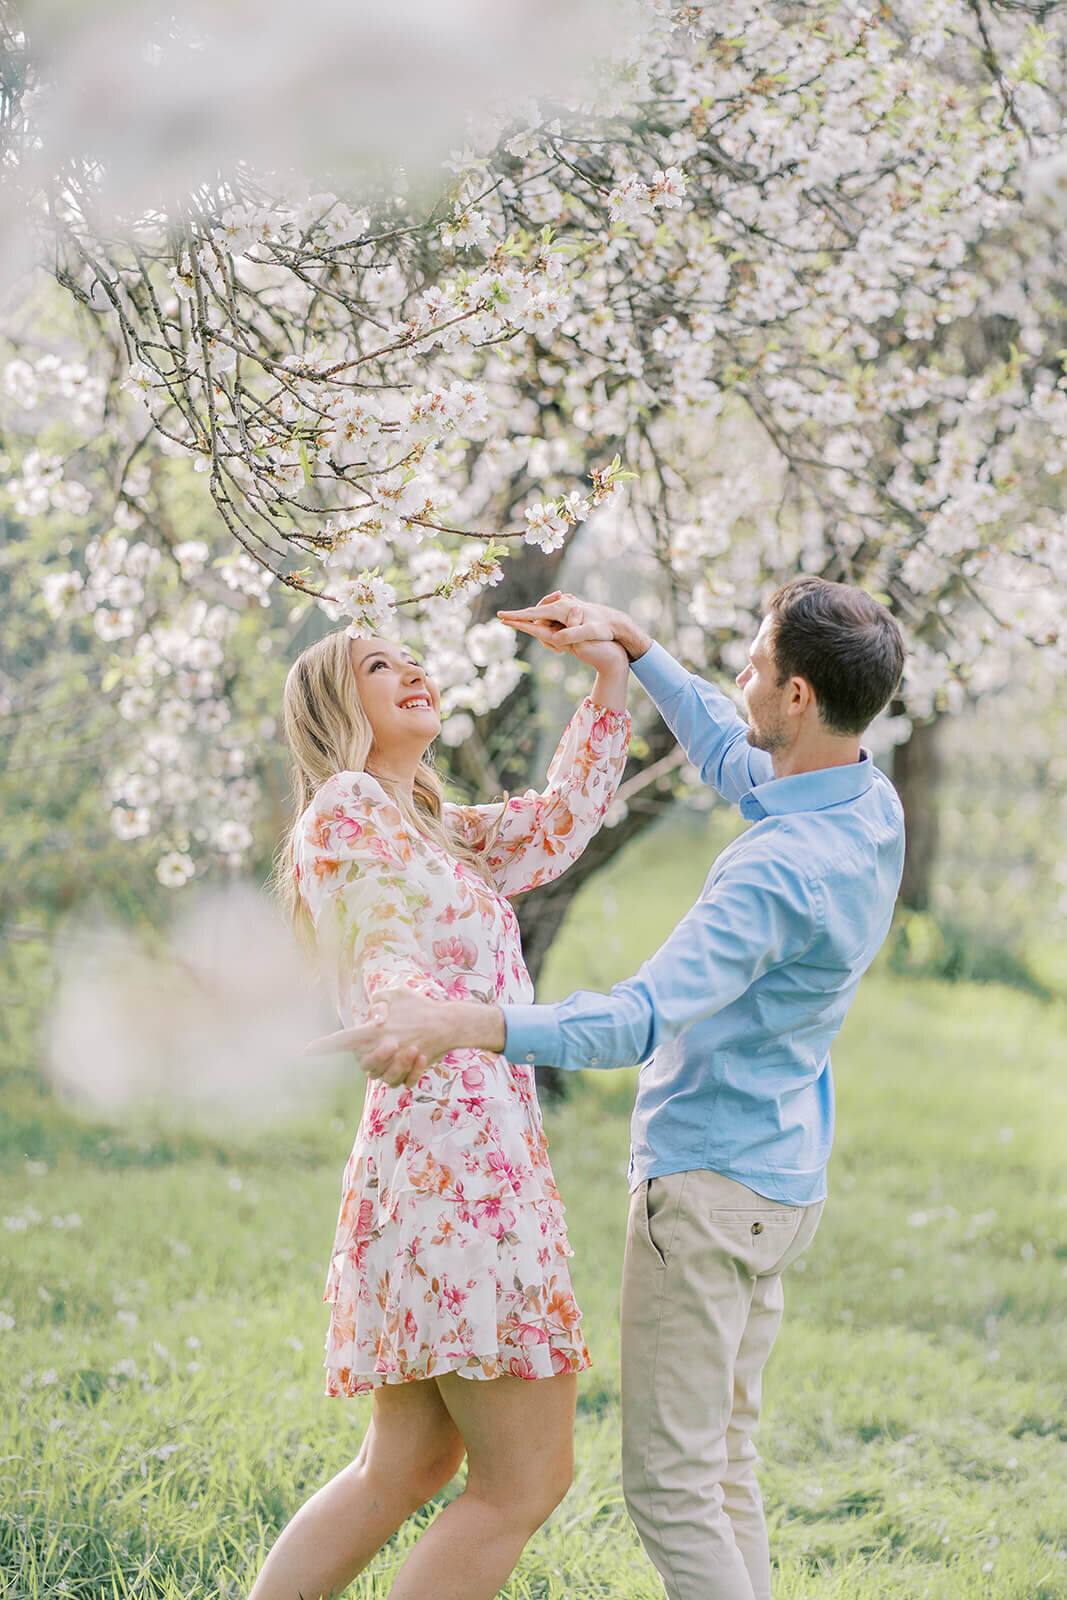 Couple embracing the romance of the season with our dreamy almond blossom photoshoot experience in Adelaide.